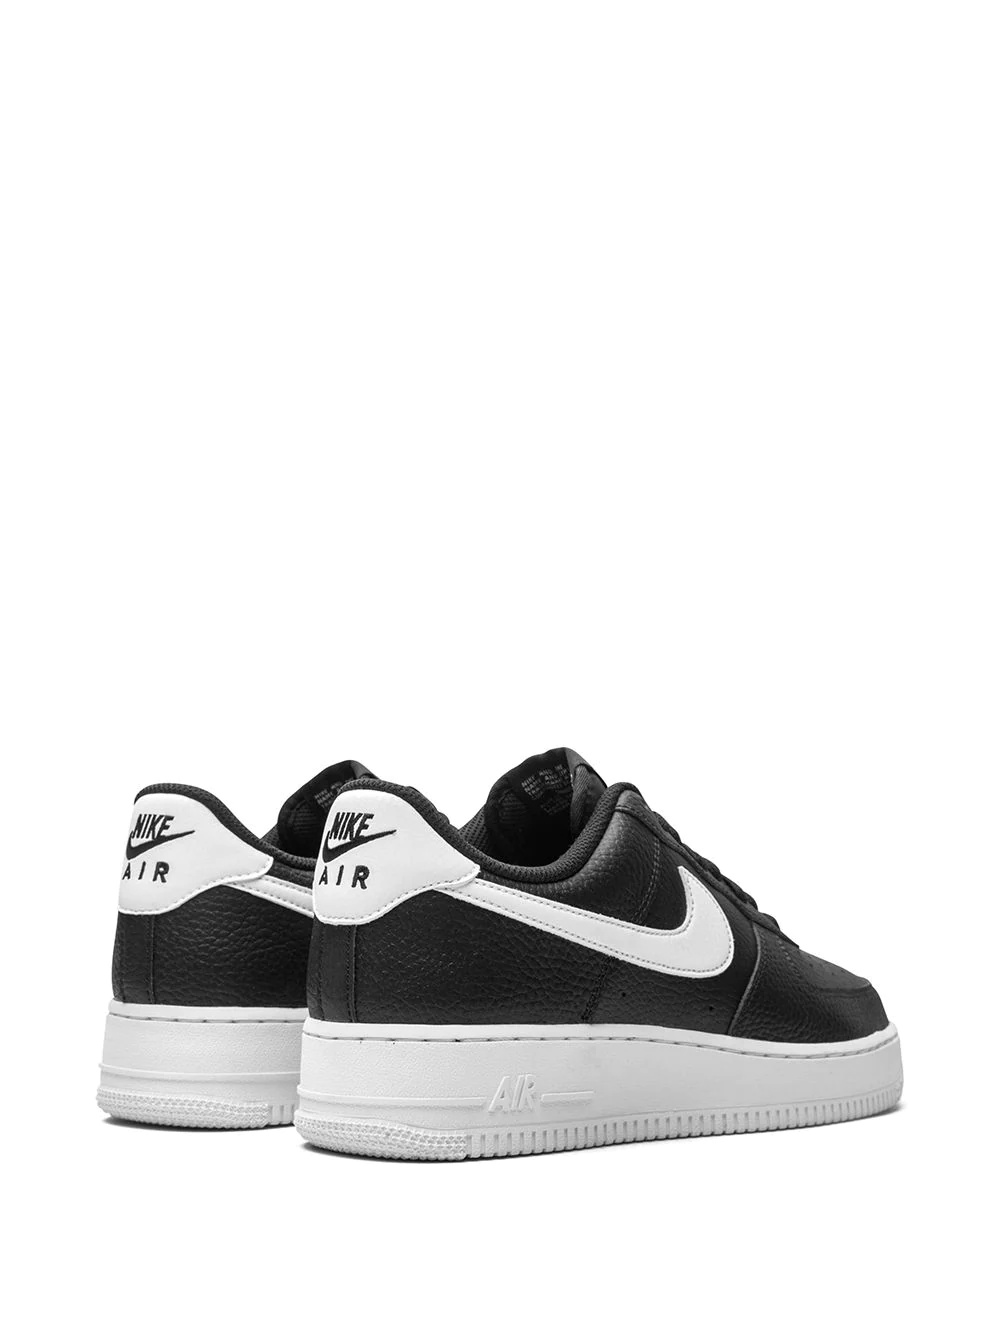 Air Force 1 Low '07 "Black/White" sneakers - 3